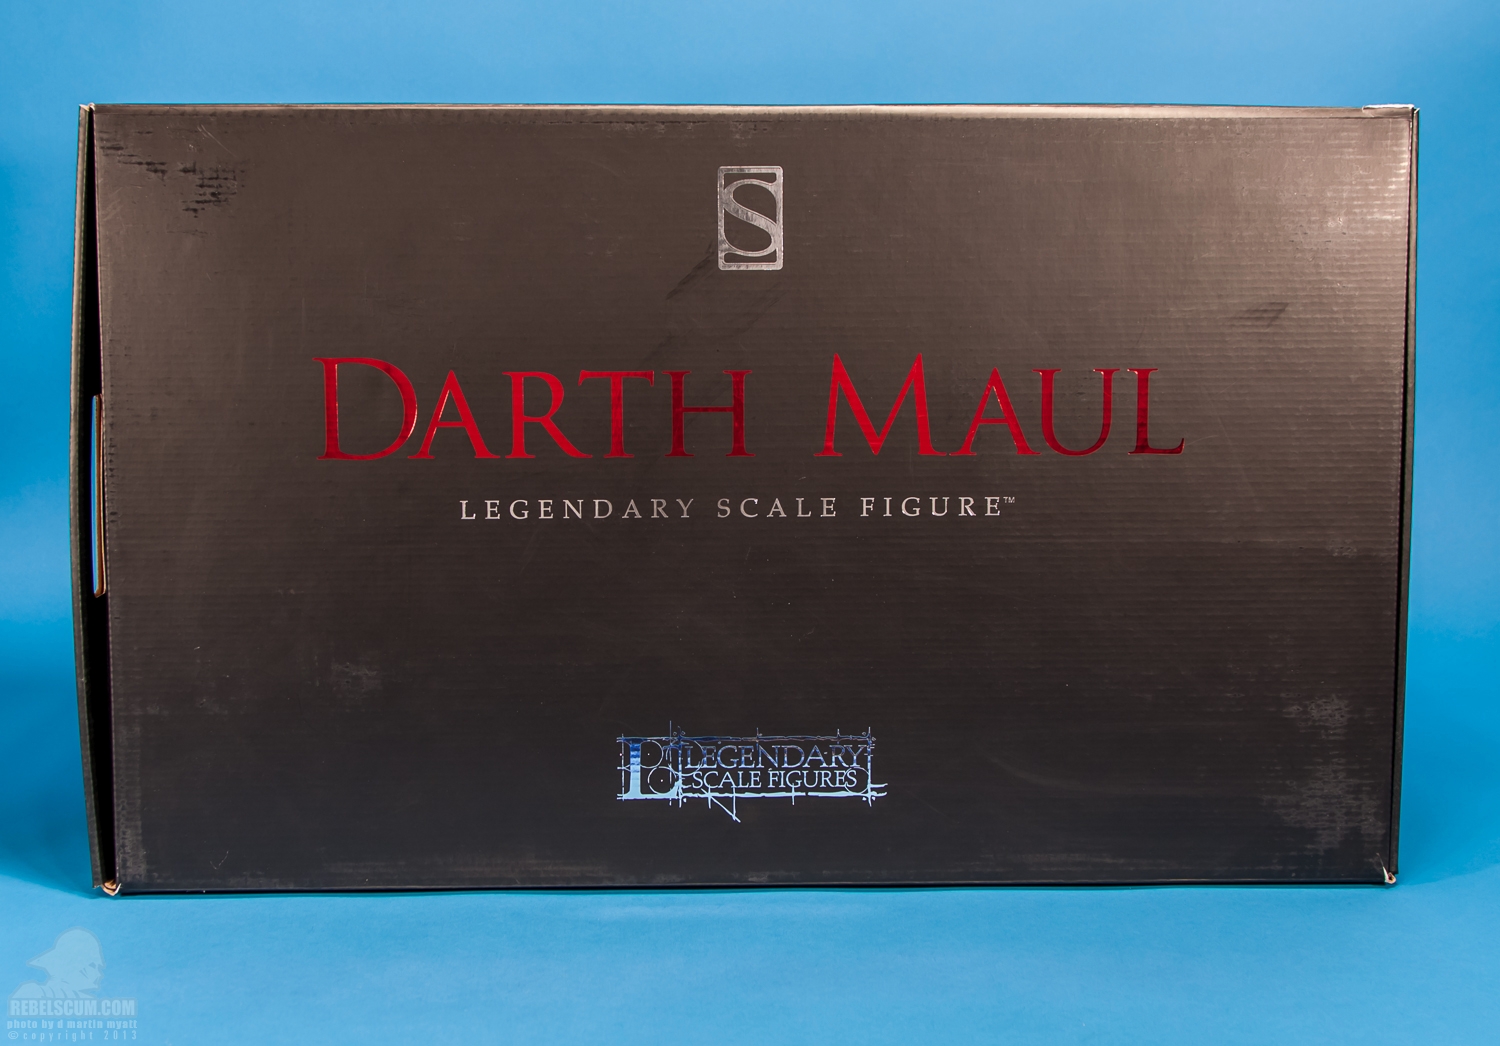 Darth_Maul_Legendary_Scale_Figure_Sideshow_Collectibles-48.jpg